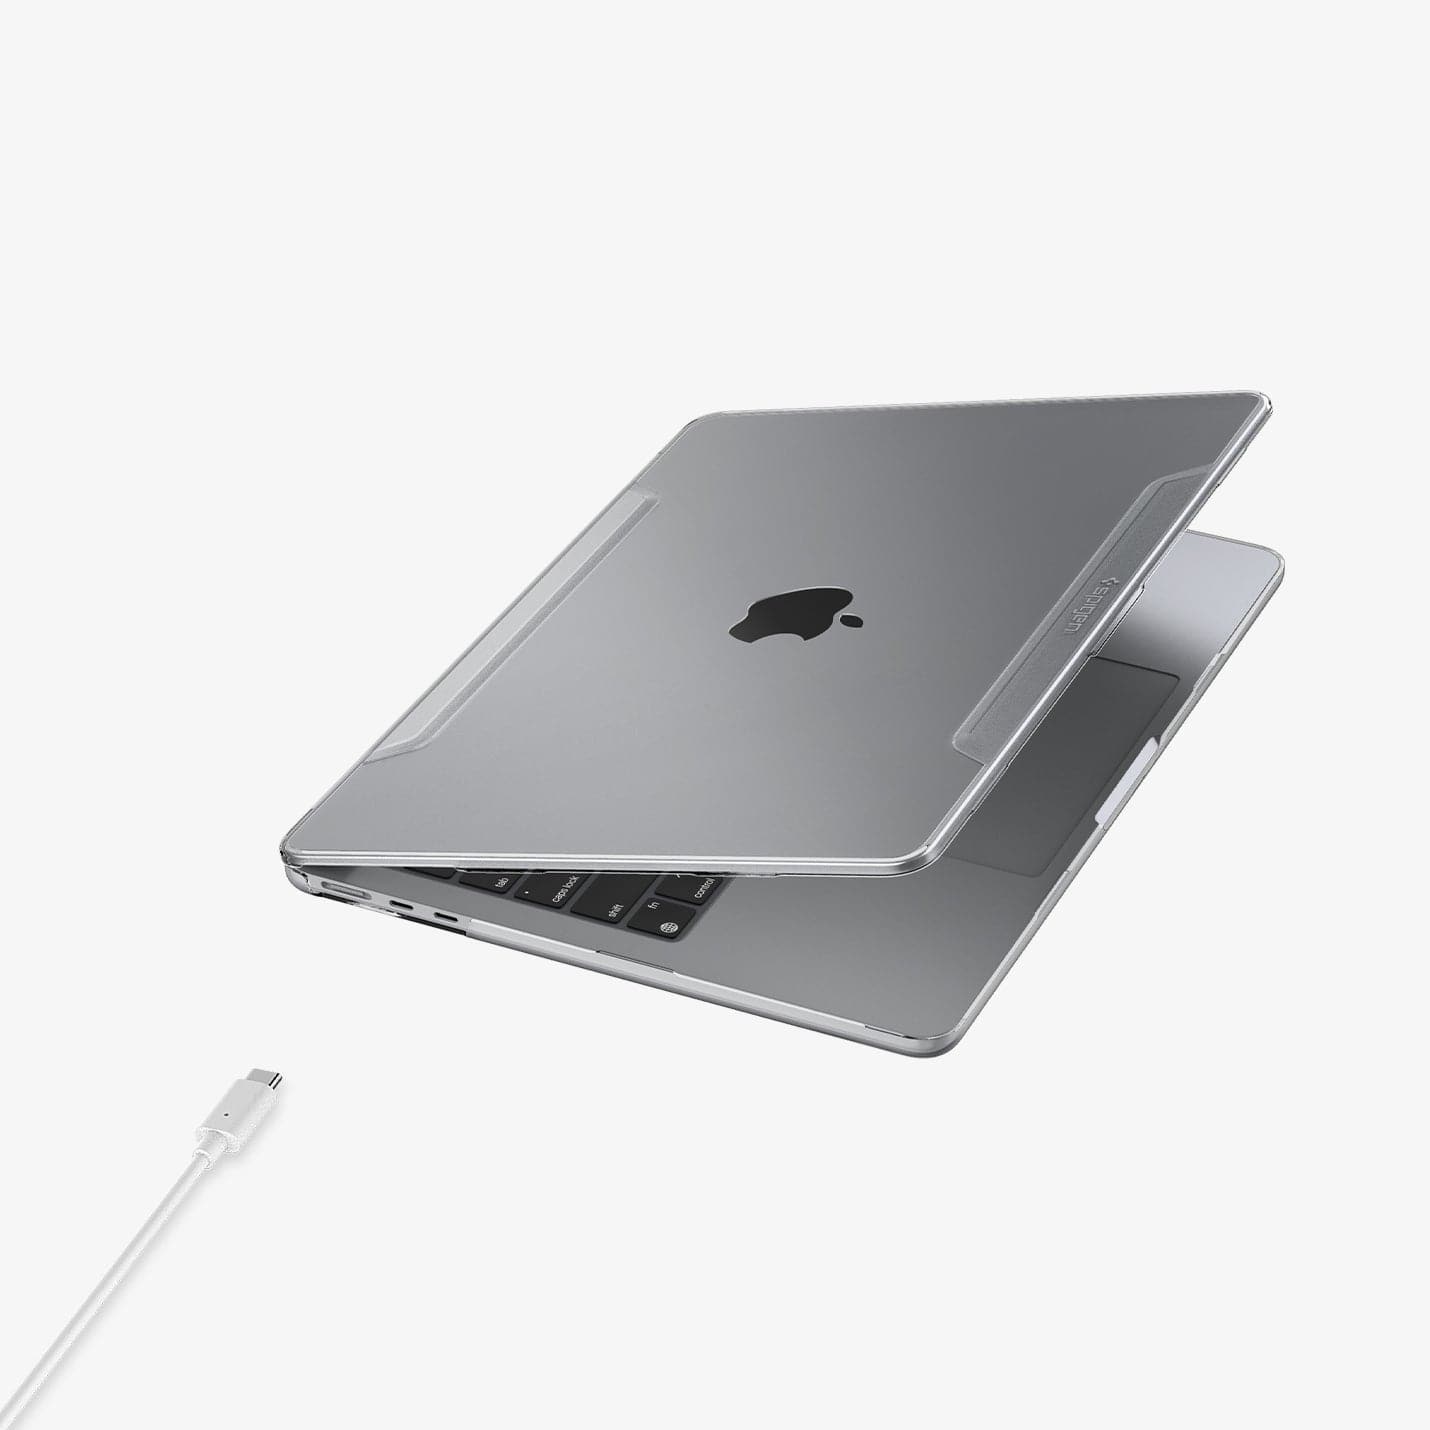 ACS05271 - MacBook Air Case Thin Fit in crystal clear showing the front and side with laptop slightly open and charging cable next to slot